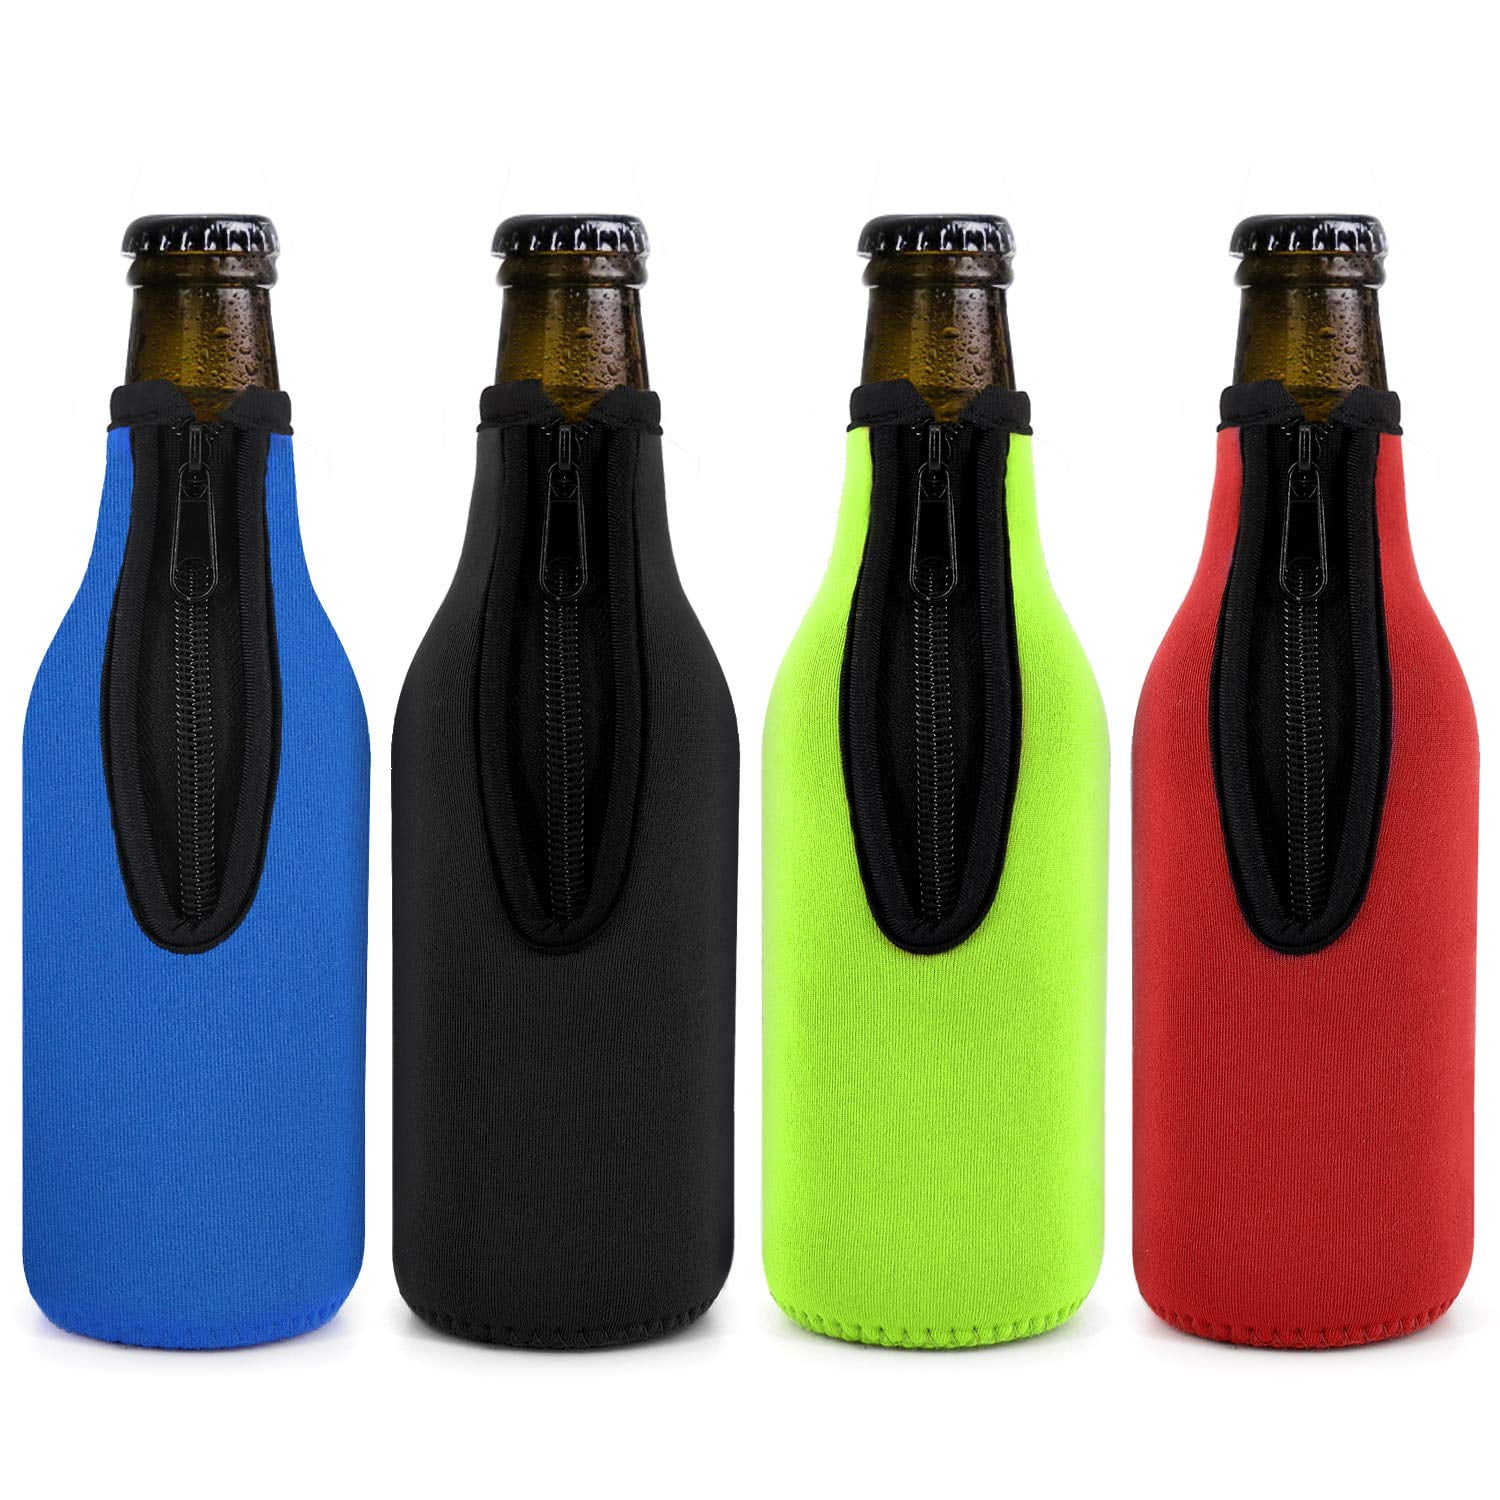 Beer Bottle Koozies, TINGOR Beer Bottle Insulator / Sleeve 4 Color. Zip-up  Bottle Jackets. Keeps Beer Cold and Hands Warm. Classic Extra Thick  Neoprene with Stitched Fabric Edges, Enclosed Bottom 